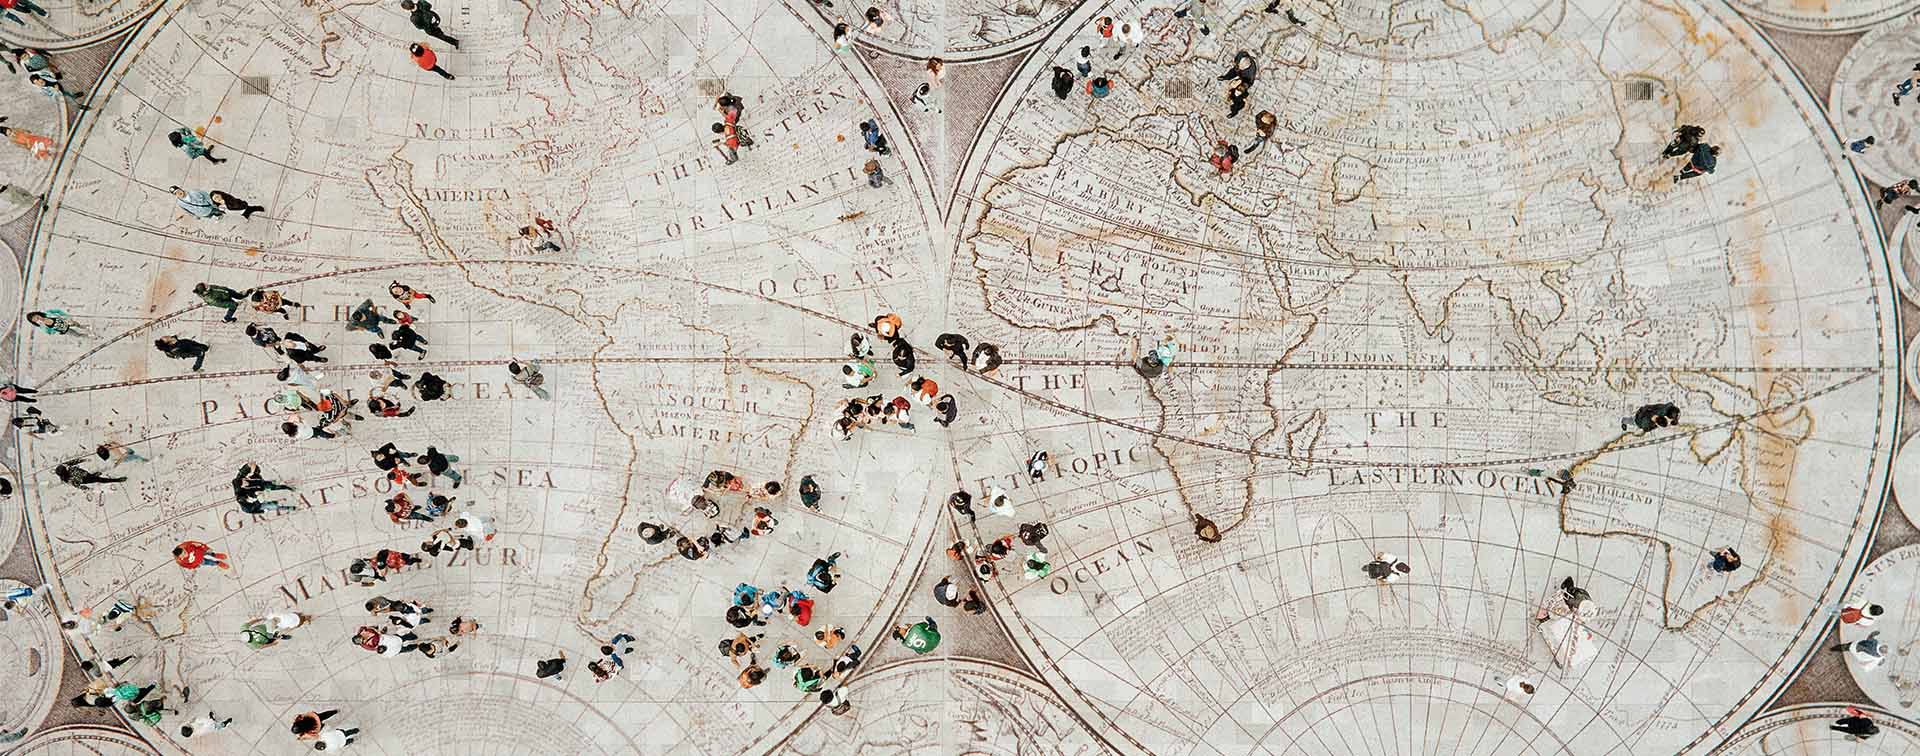 Aerial view of people walking over a floor with a world map design.